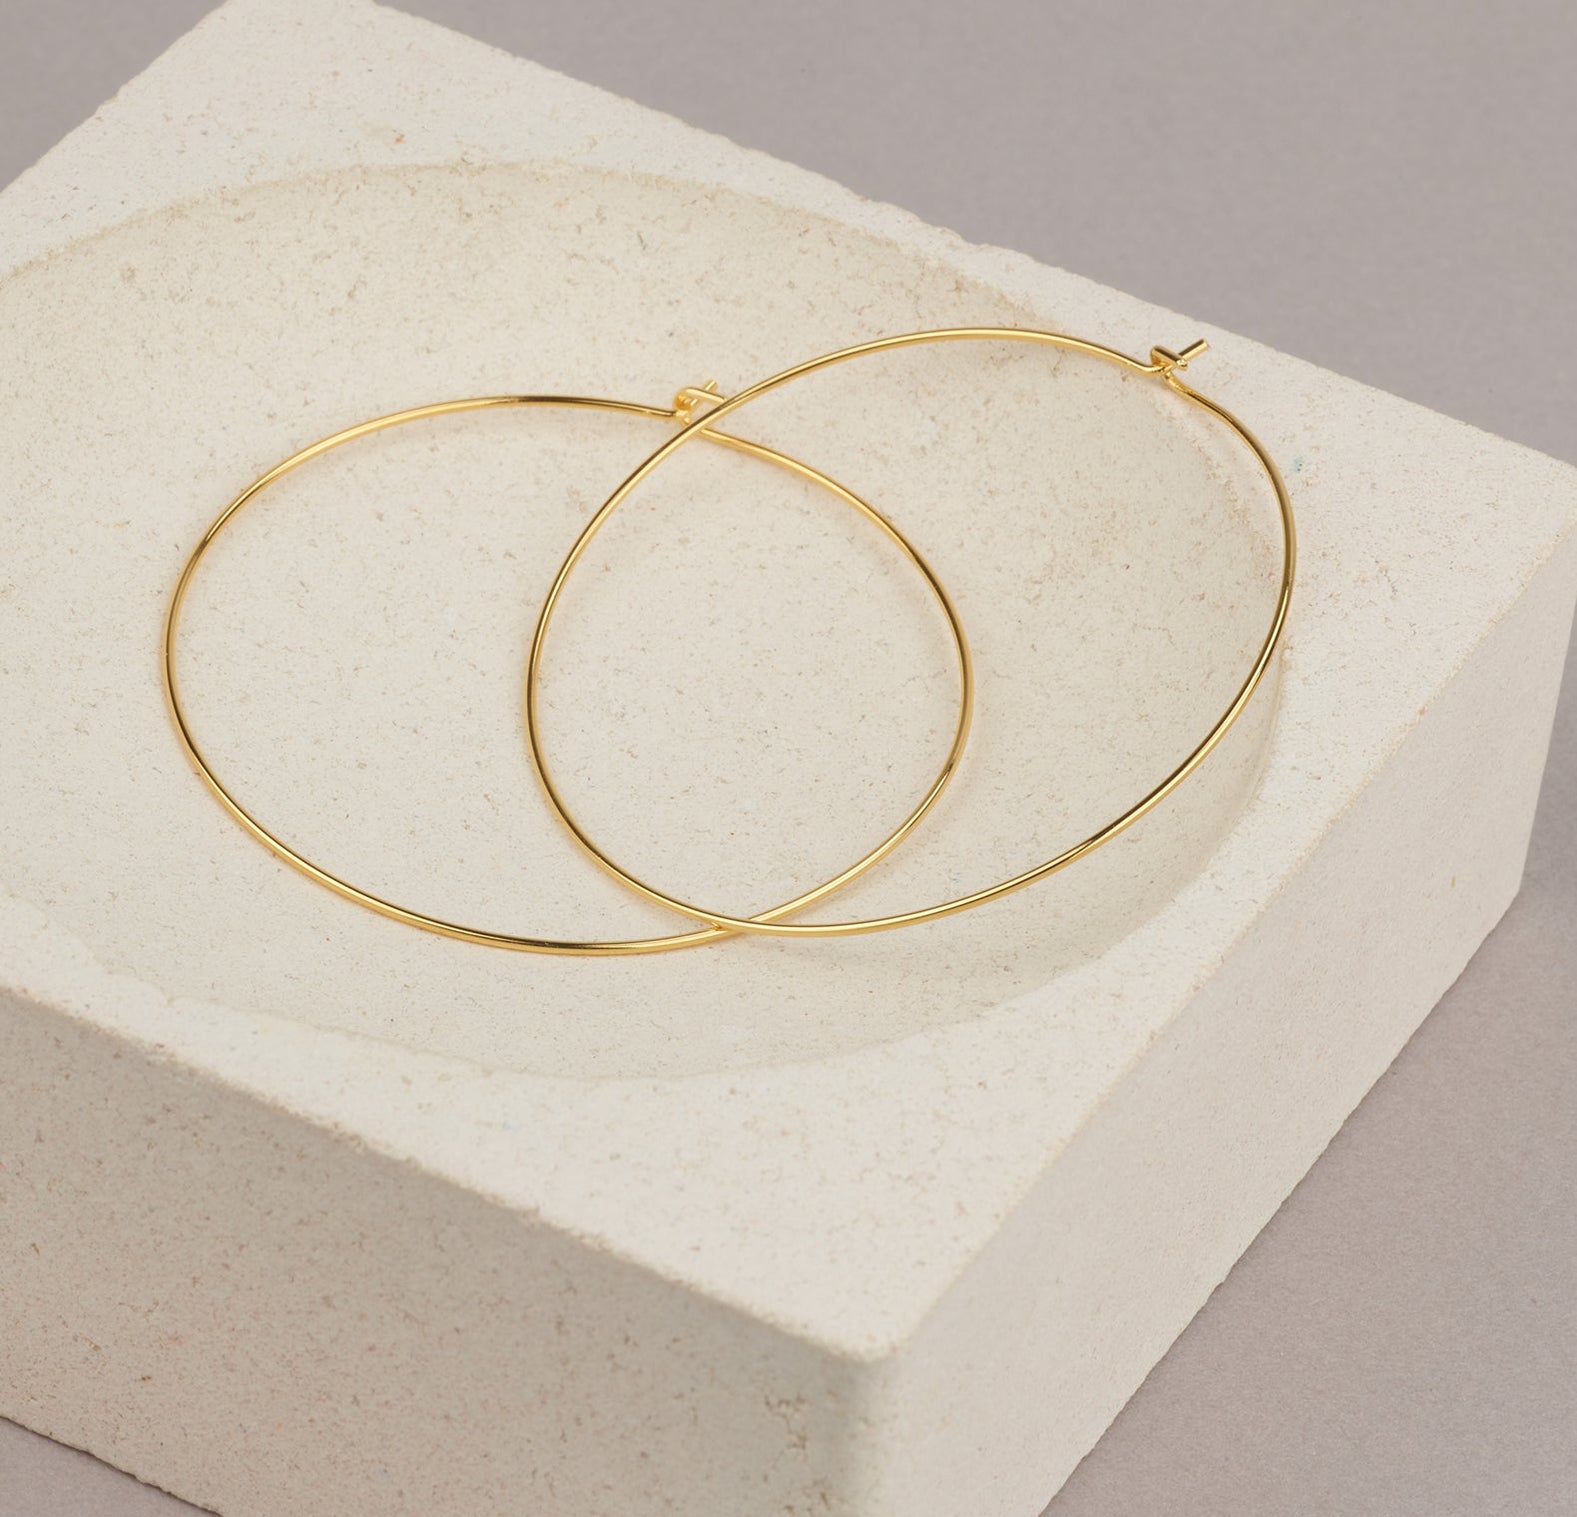 2 Inches Gold Hoops Earrings– HLcollection - Handmade Gold and Silver ...